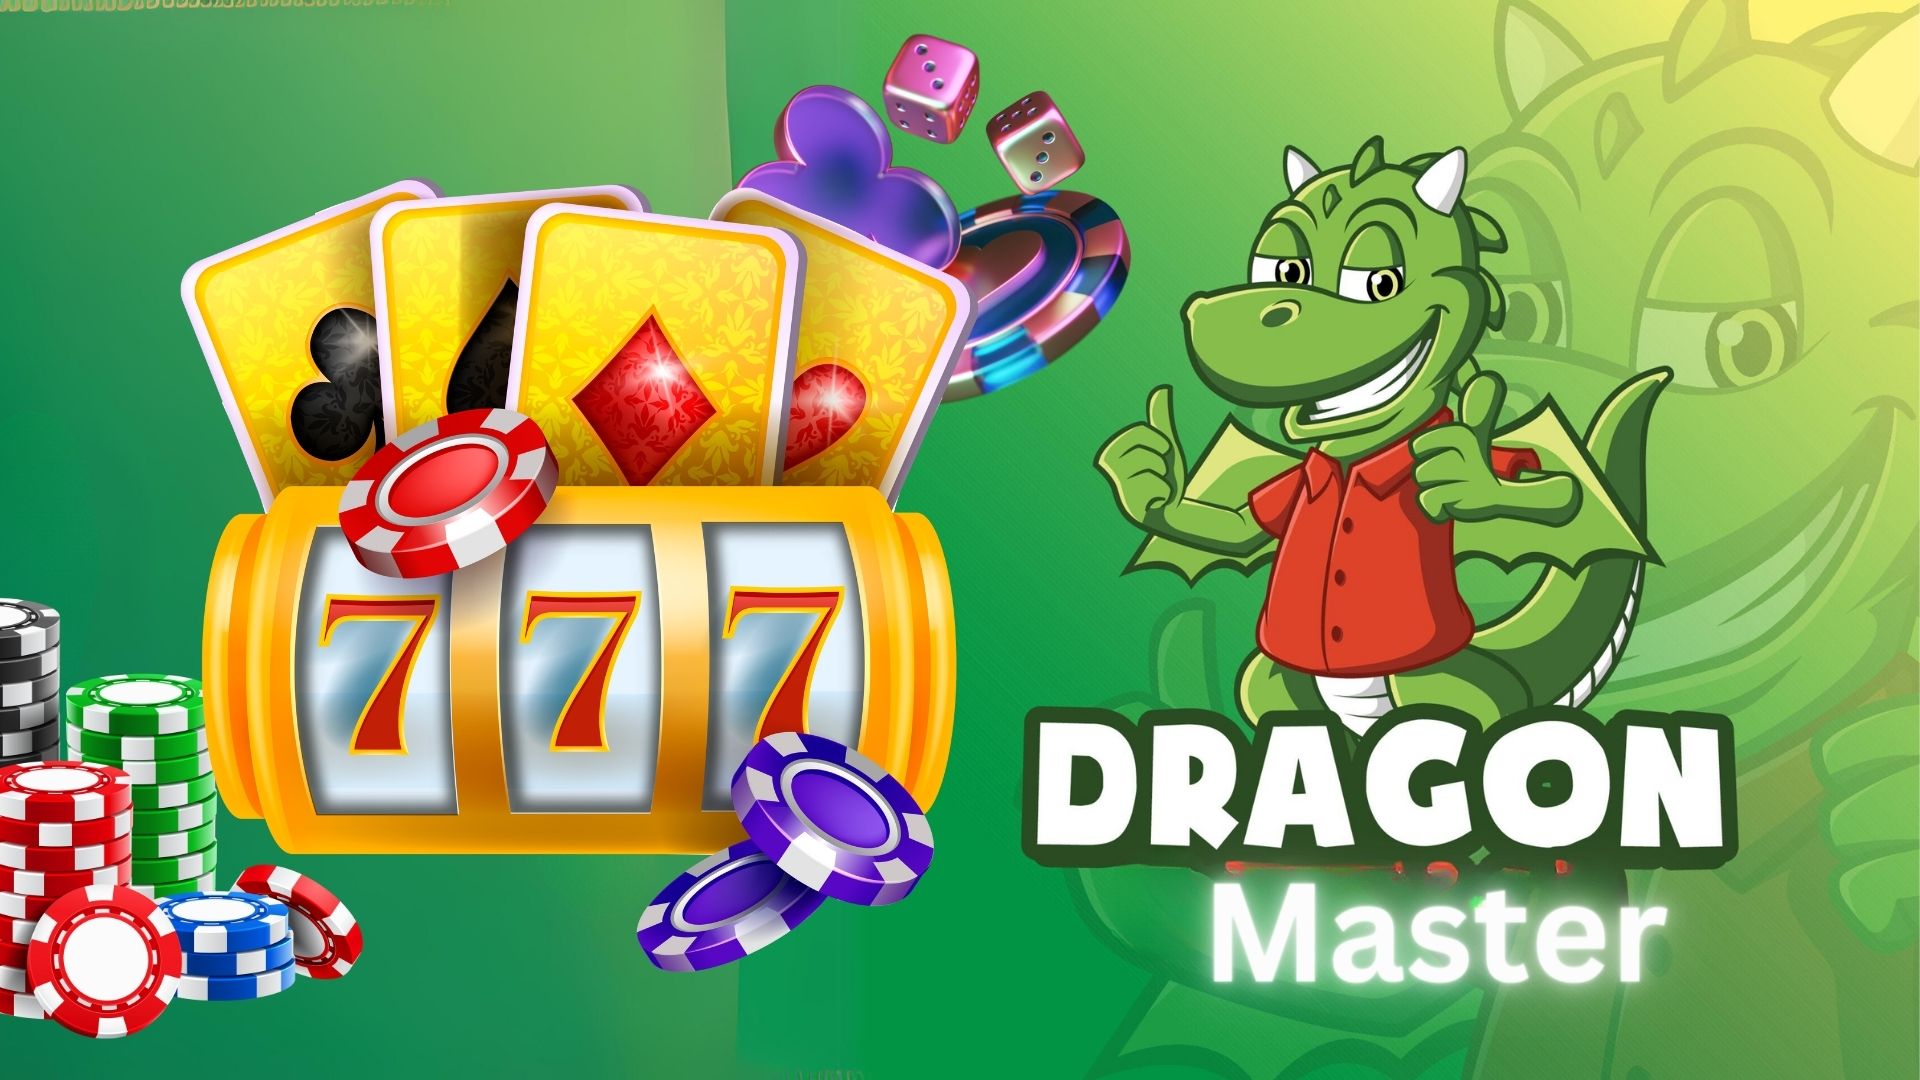 Prepare to embark on a scintillating journey with Dragon Master, the latest 3D fish shooting game from JDB Gaming. The game promises to deliver an unparalleled experience, with a gameplay similar to that of traditional fish shooting games, but with a twist